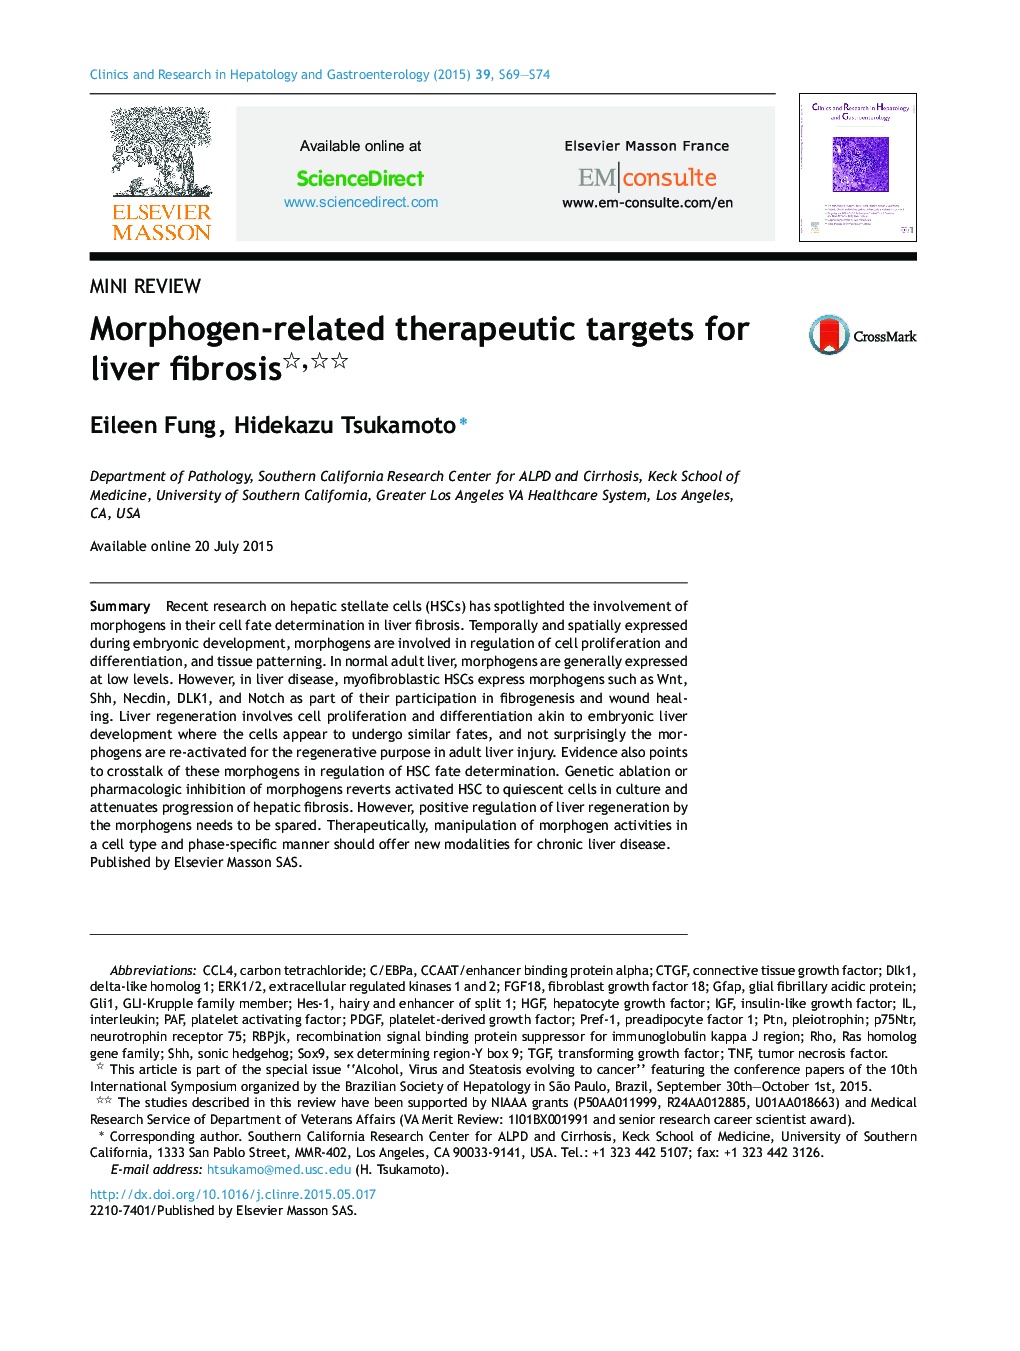 Morphogen-related therapeutic targets for liver fibrosis 